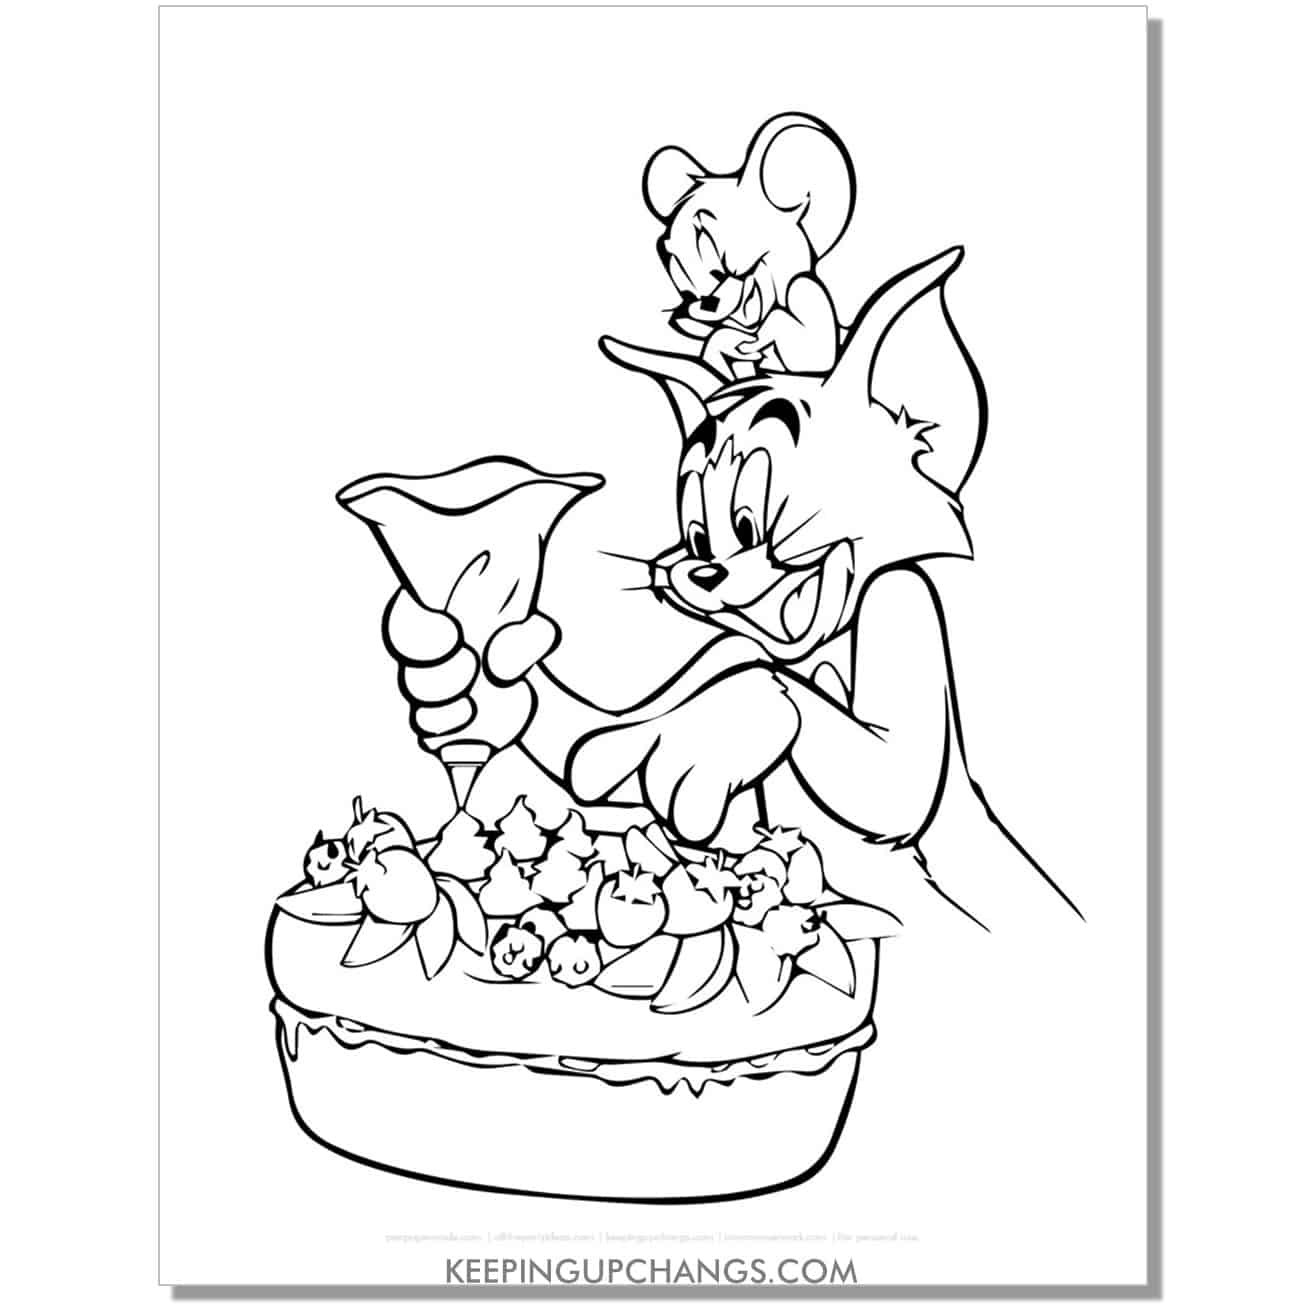 free tom and jerry decorating cake coloring page.